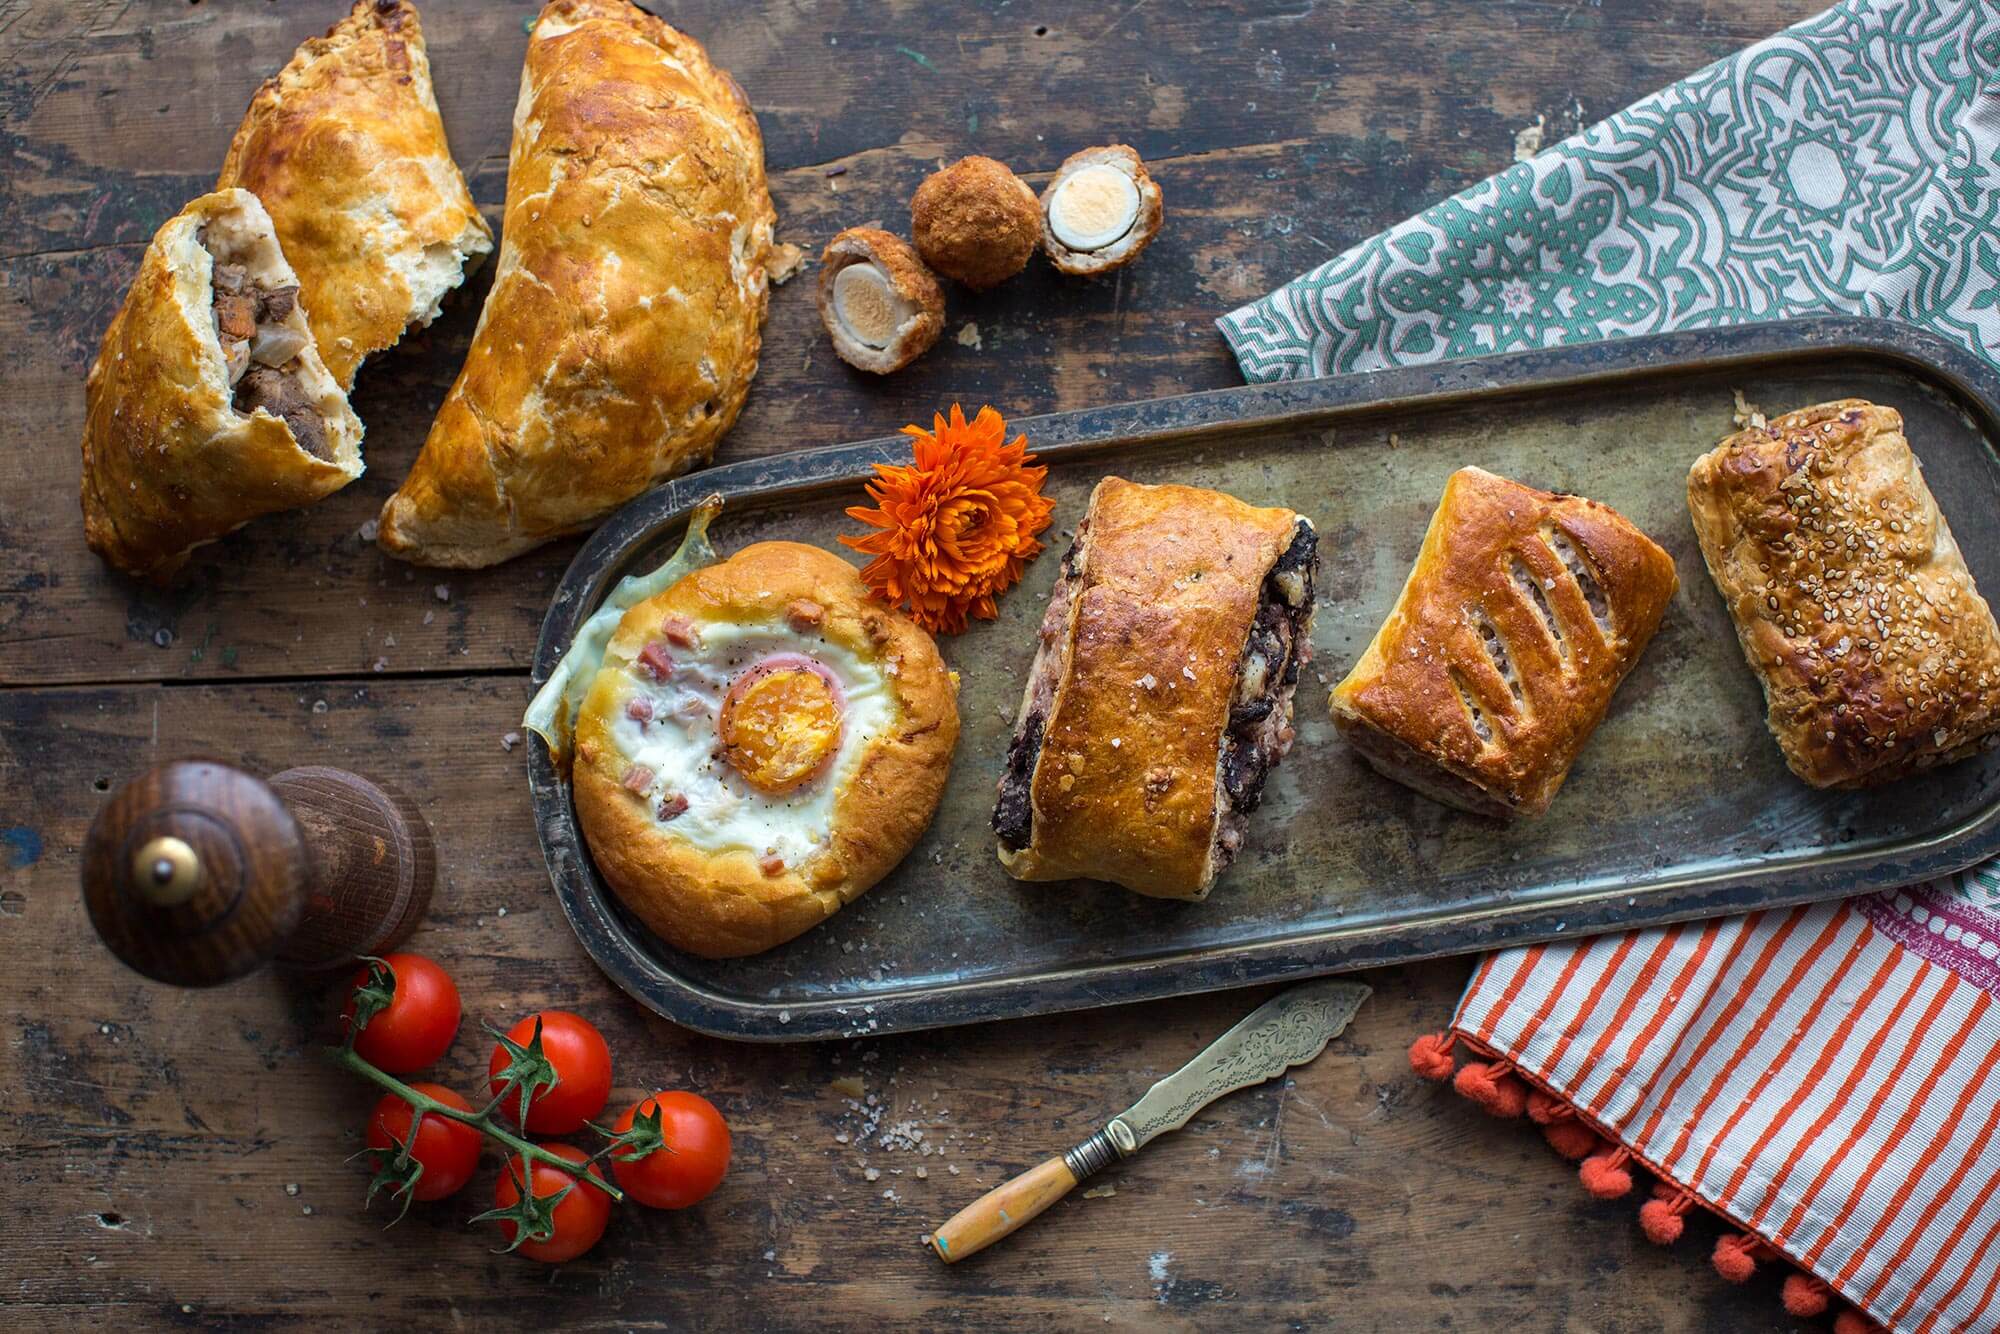 Pasties, Pastries and sausage rolls